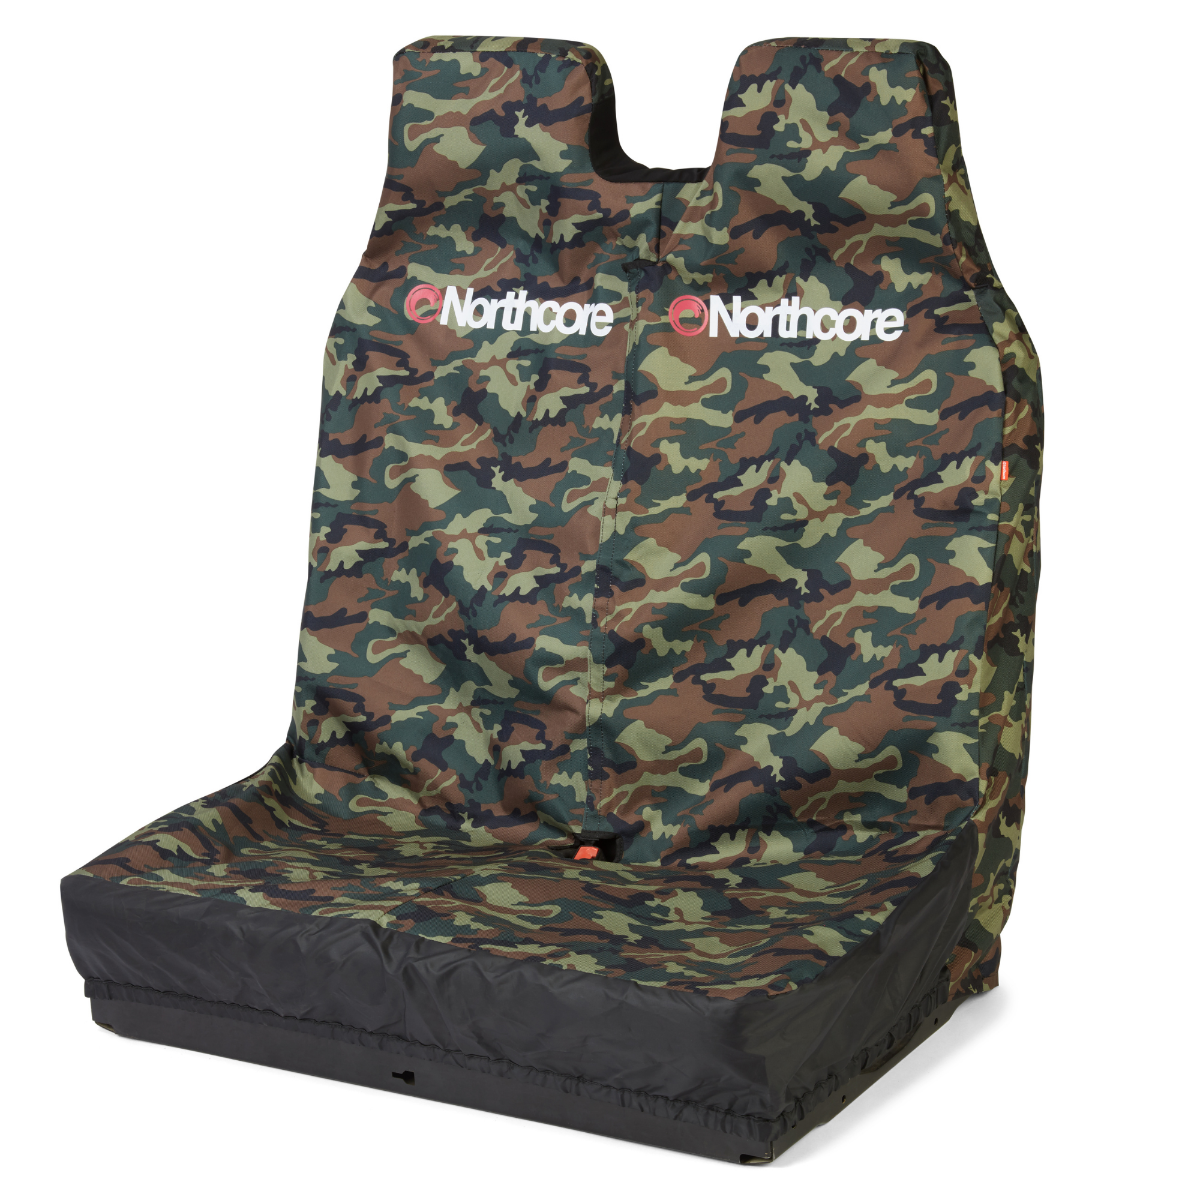 Camo double seat covers